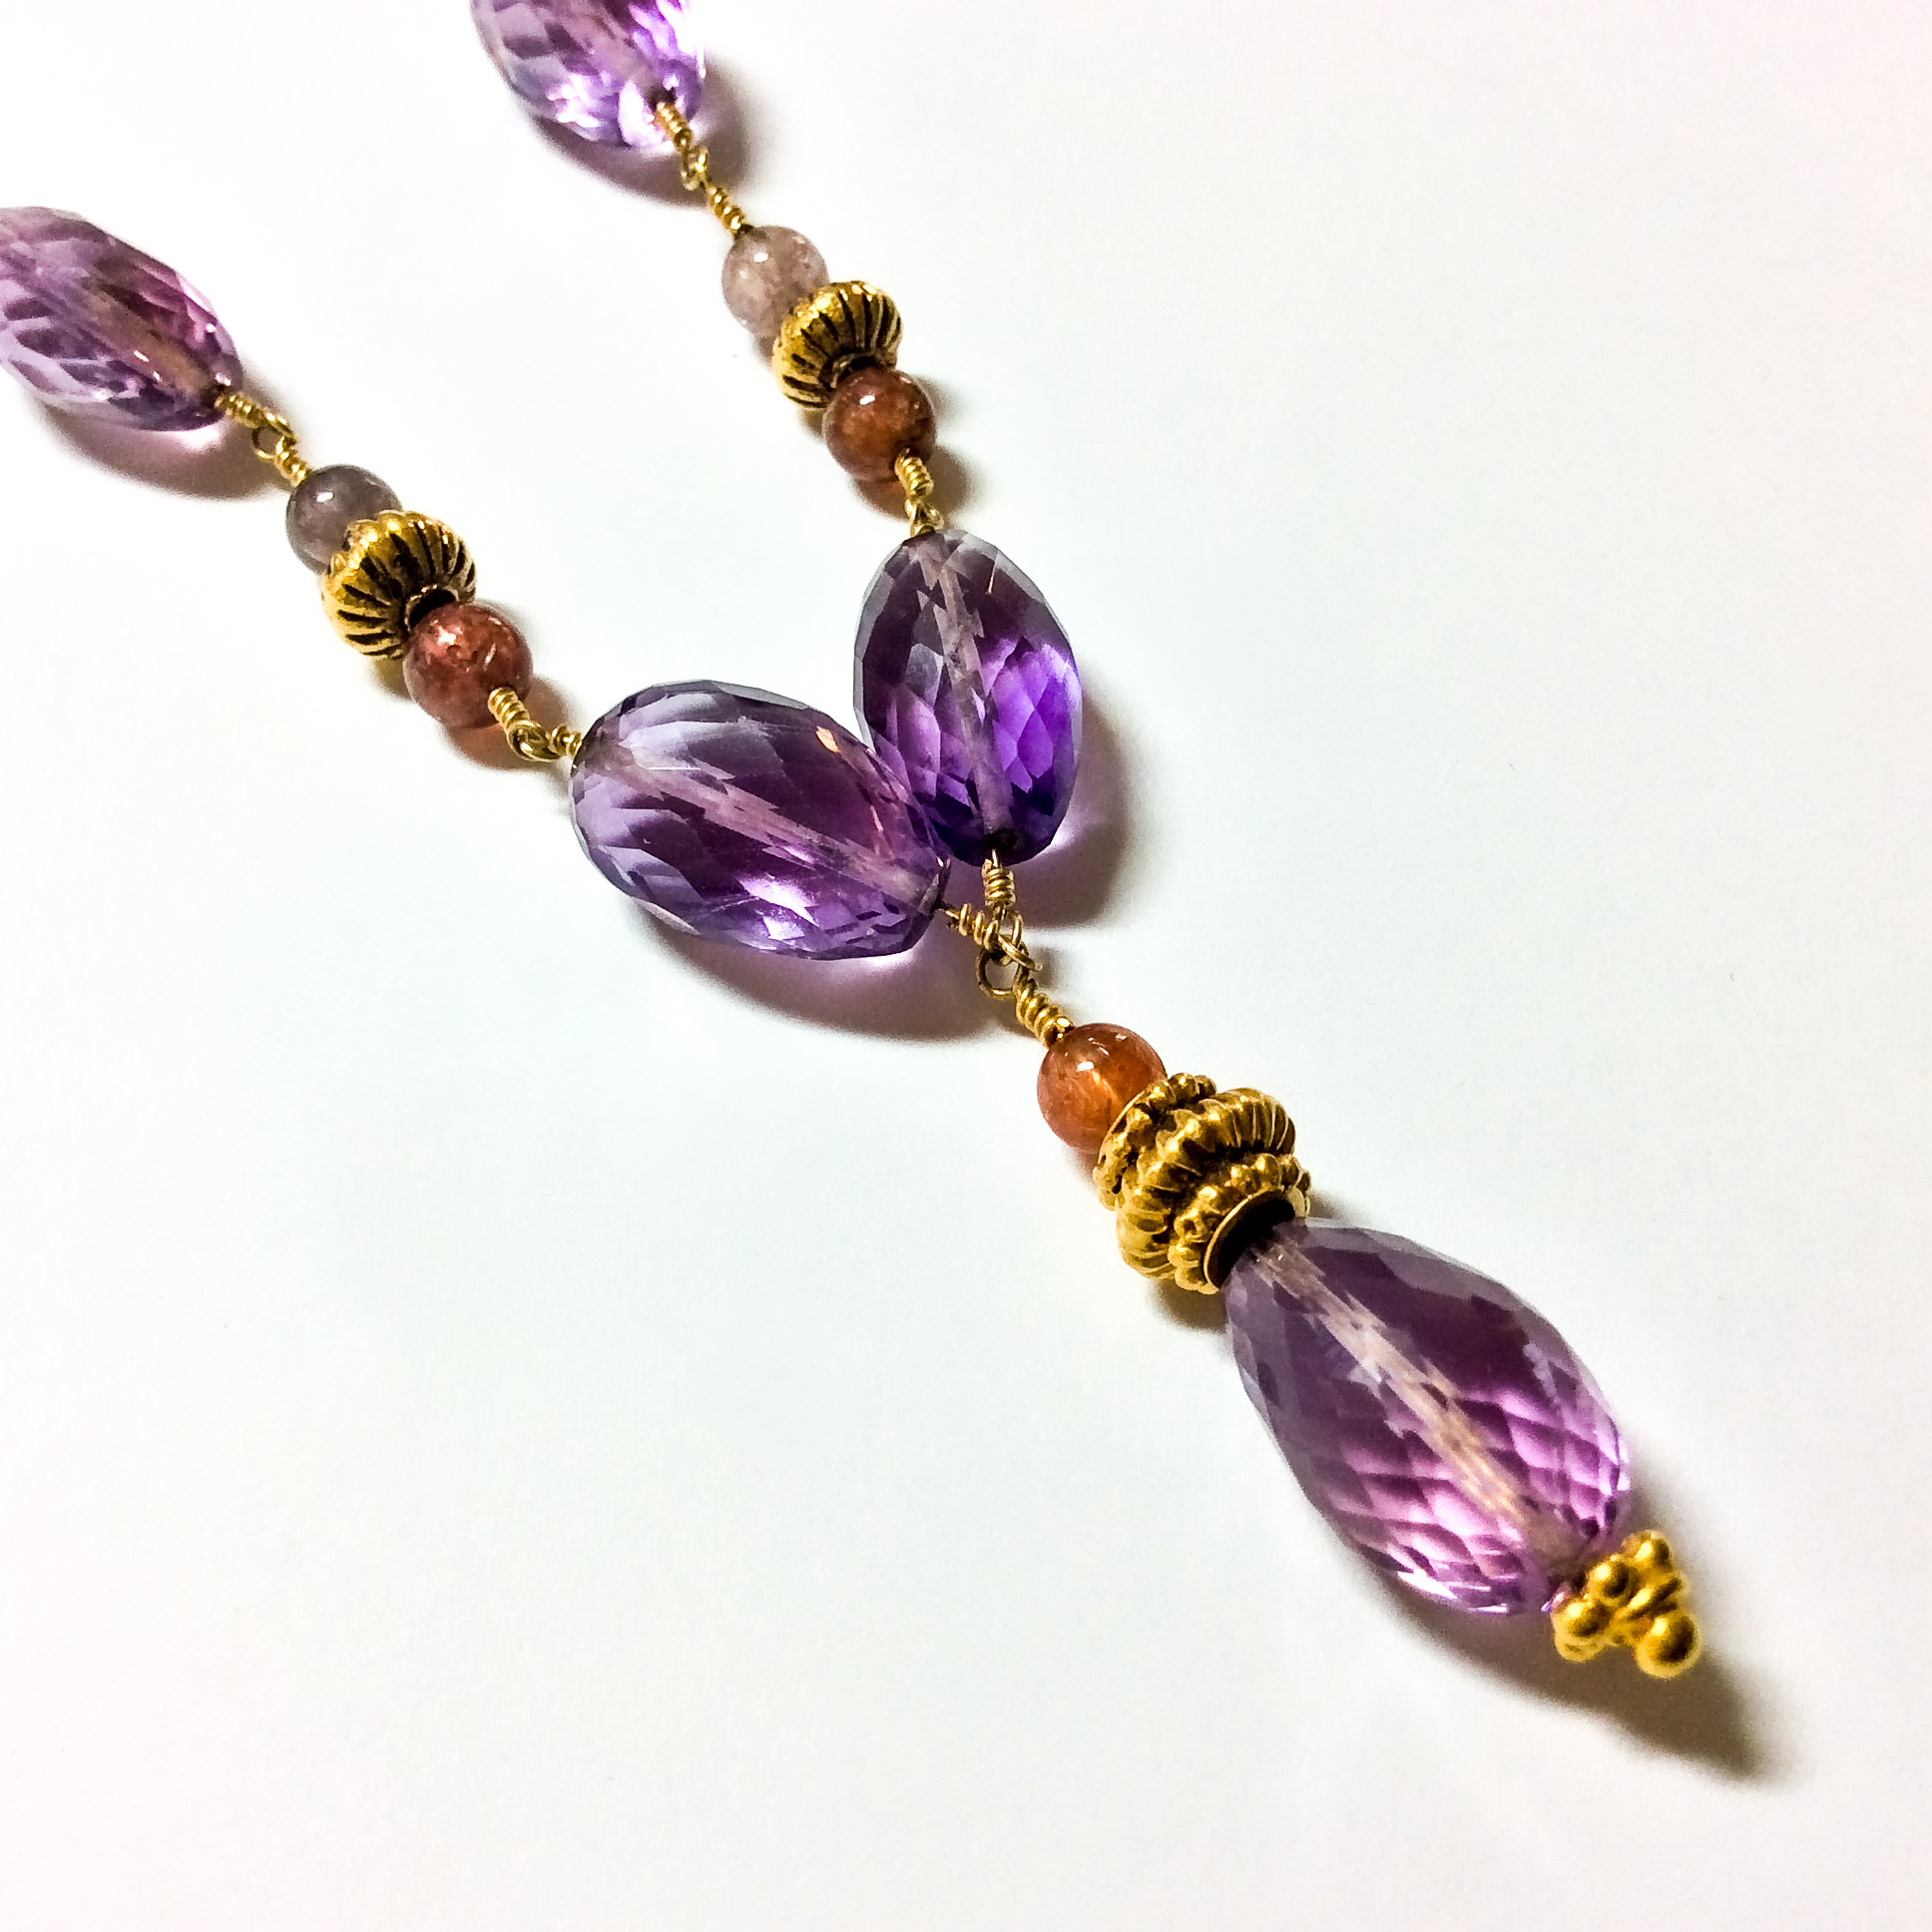 Closeup view of amethyst necklace showing 22K gold wire wrapping and antiques India high karat gold beads